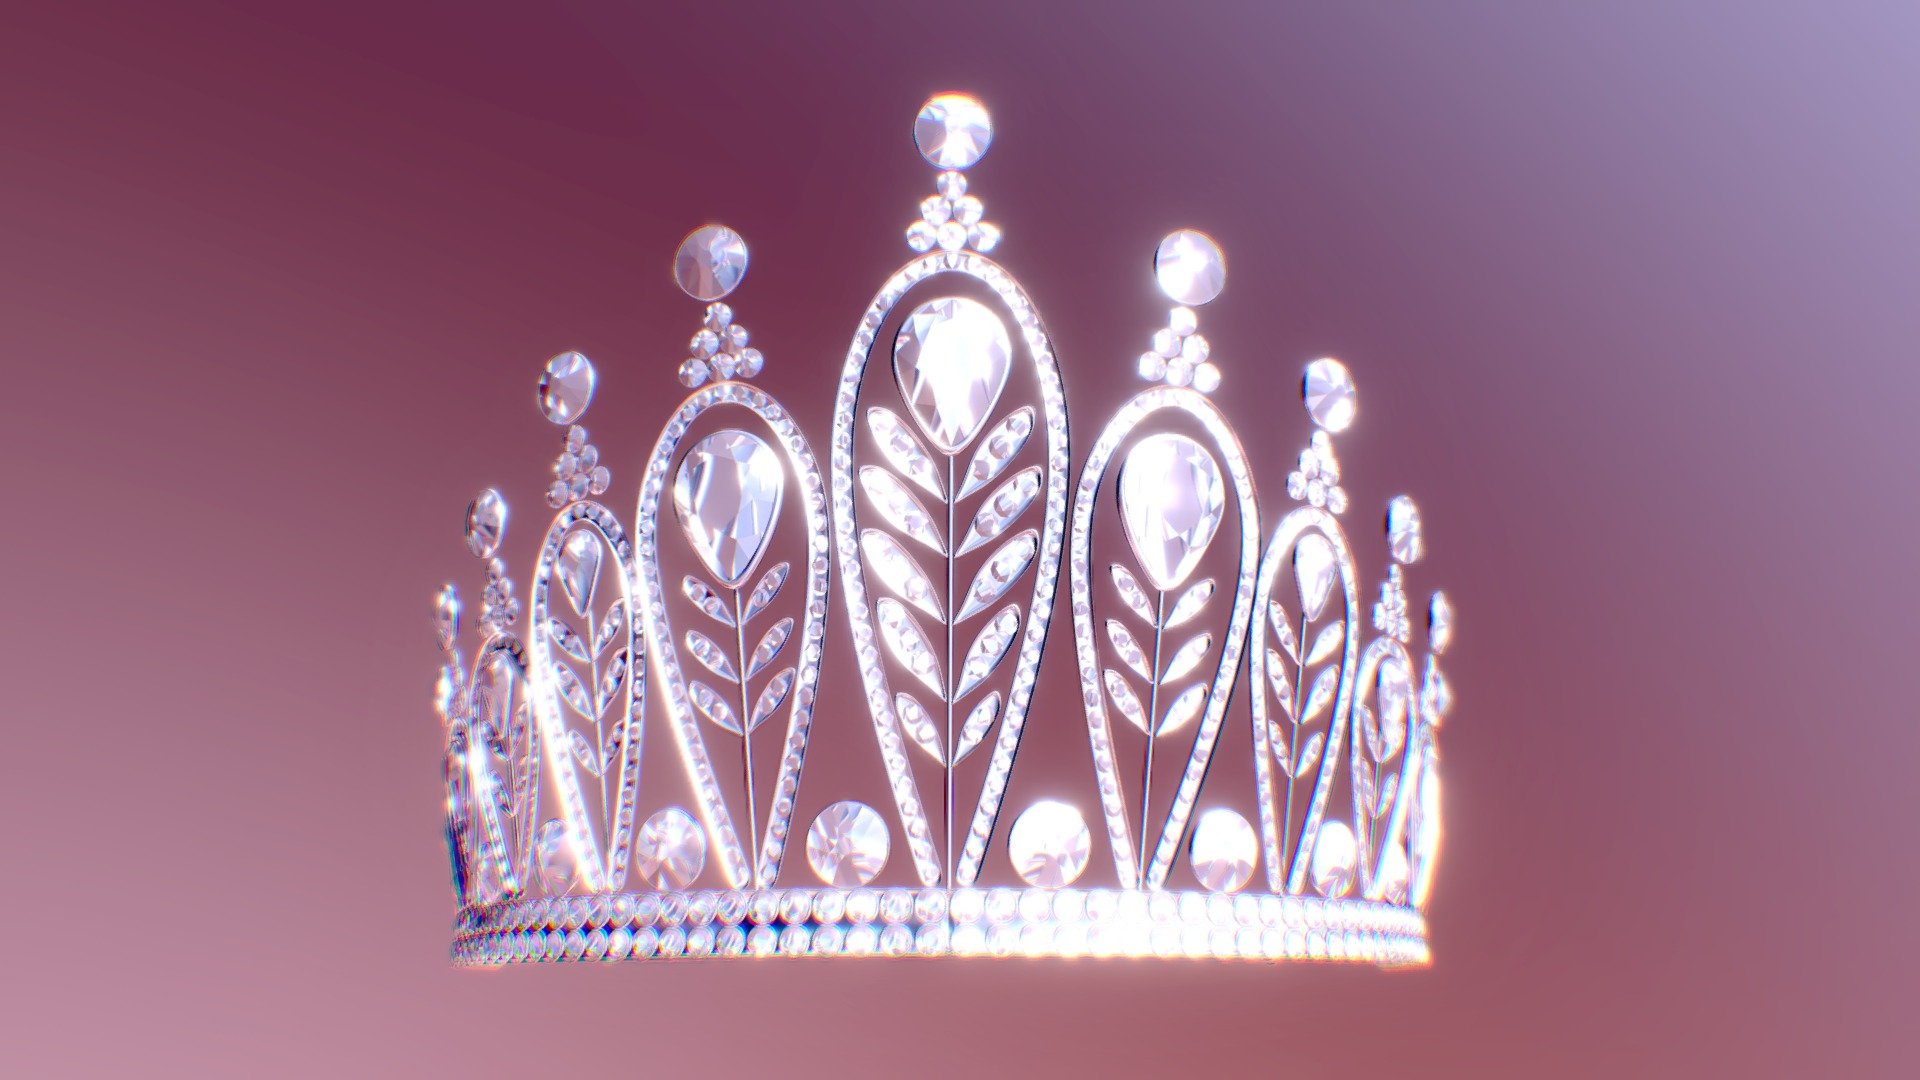 Tiara 3D object model in .obj format. Generic materials are included in .mtl file. For best results tweak your own render engine and materials. You also might be interested in other my tiara and crown models: https://sketchfab.com/sk-pro/collections/tiaras , https://sketchfab.com/sk-pro/collections/crowns . Best Regards 3d model